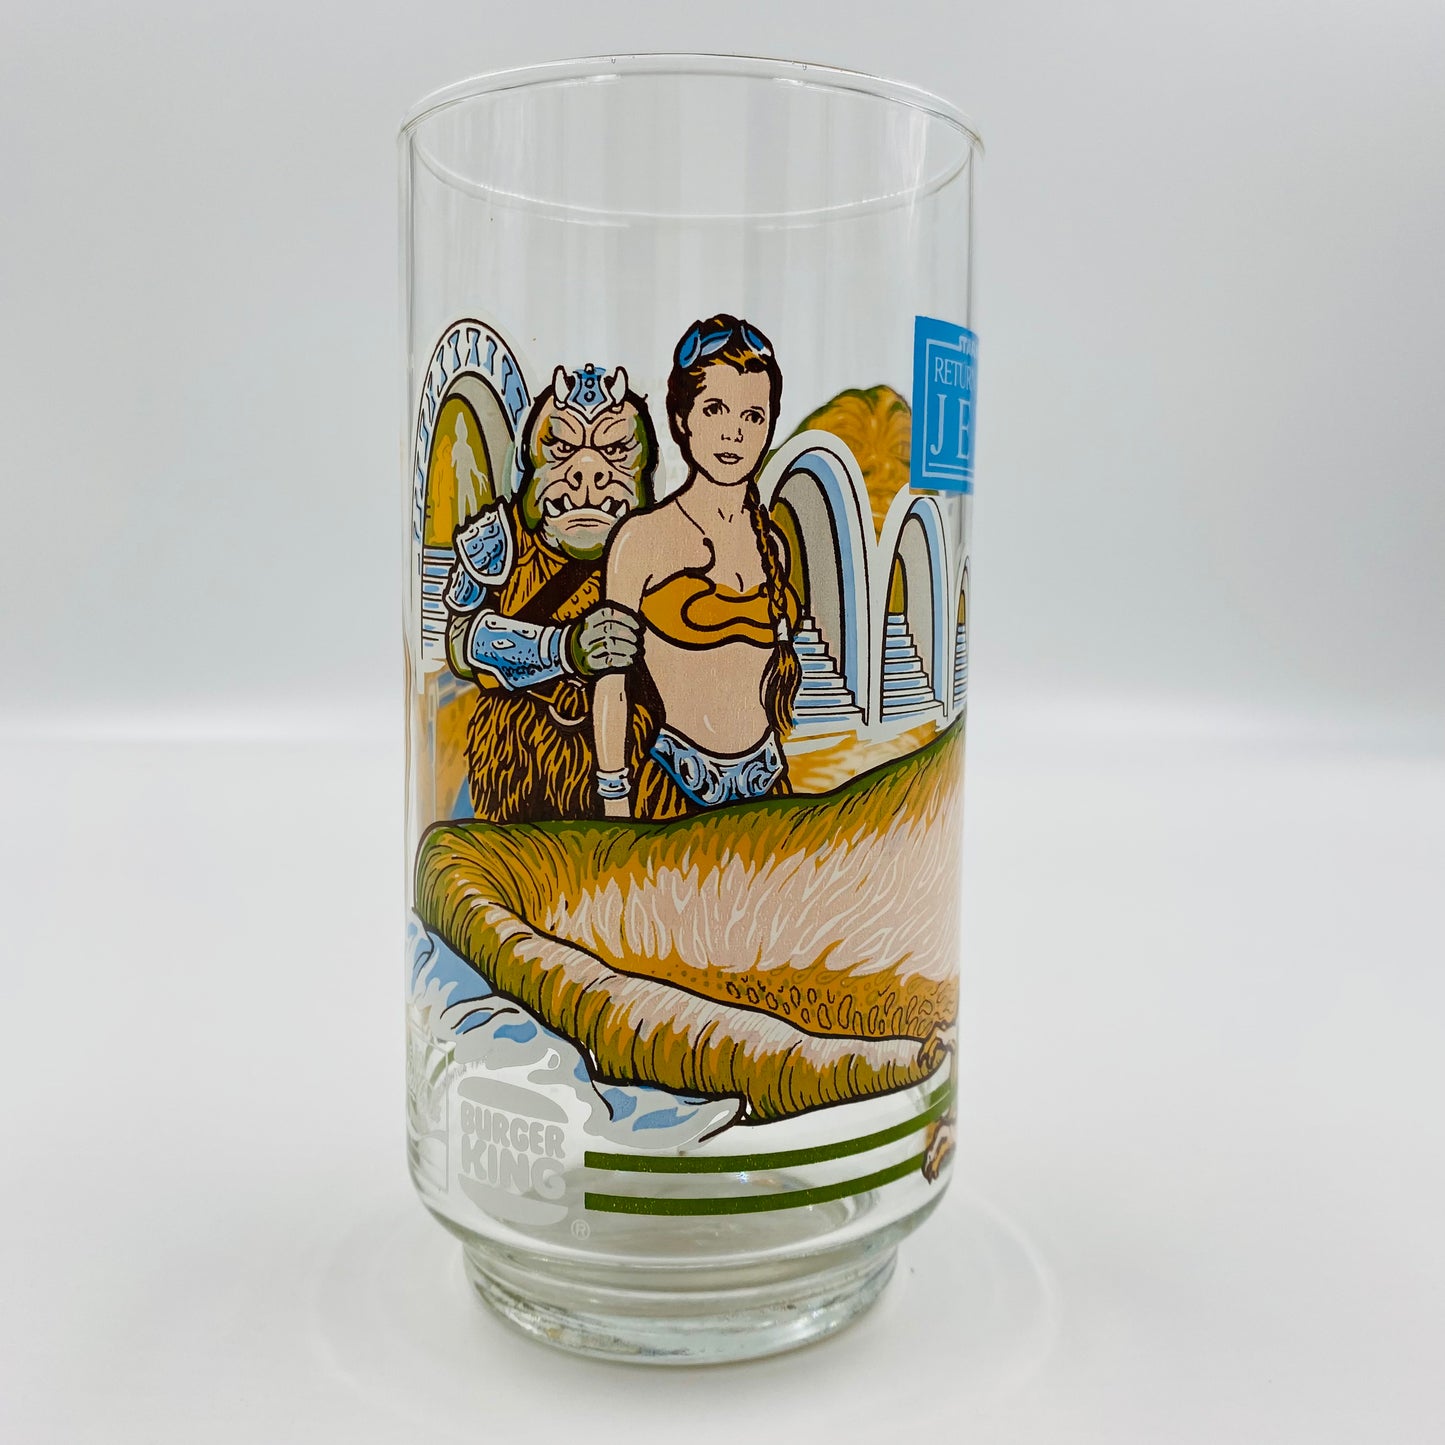 Burger King Coca-Cola Return of the Jedi Slave Leia in Jabba’s Palace glass (1983)